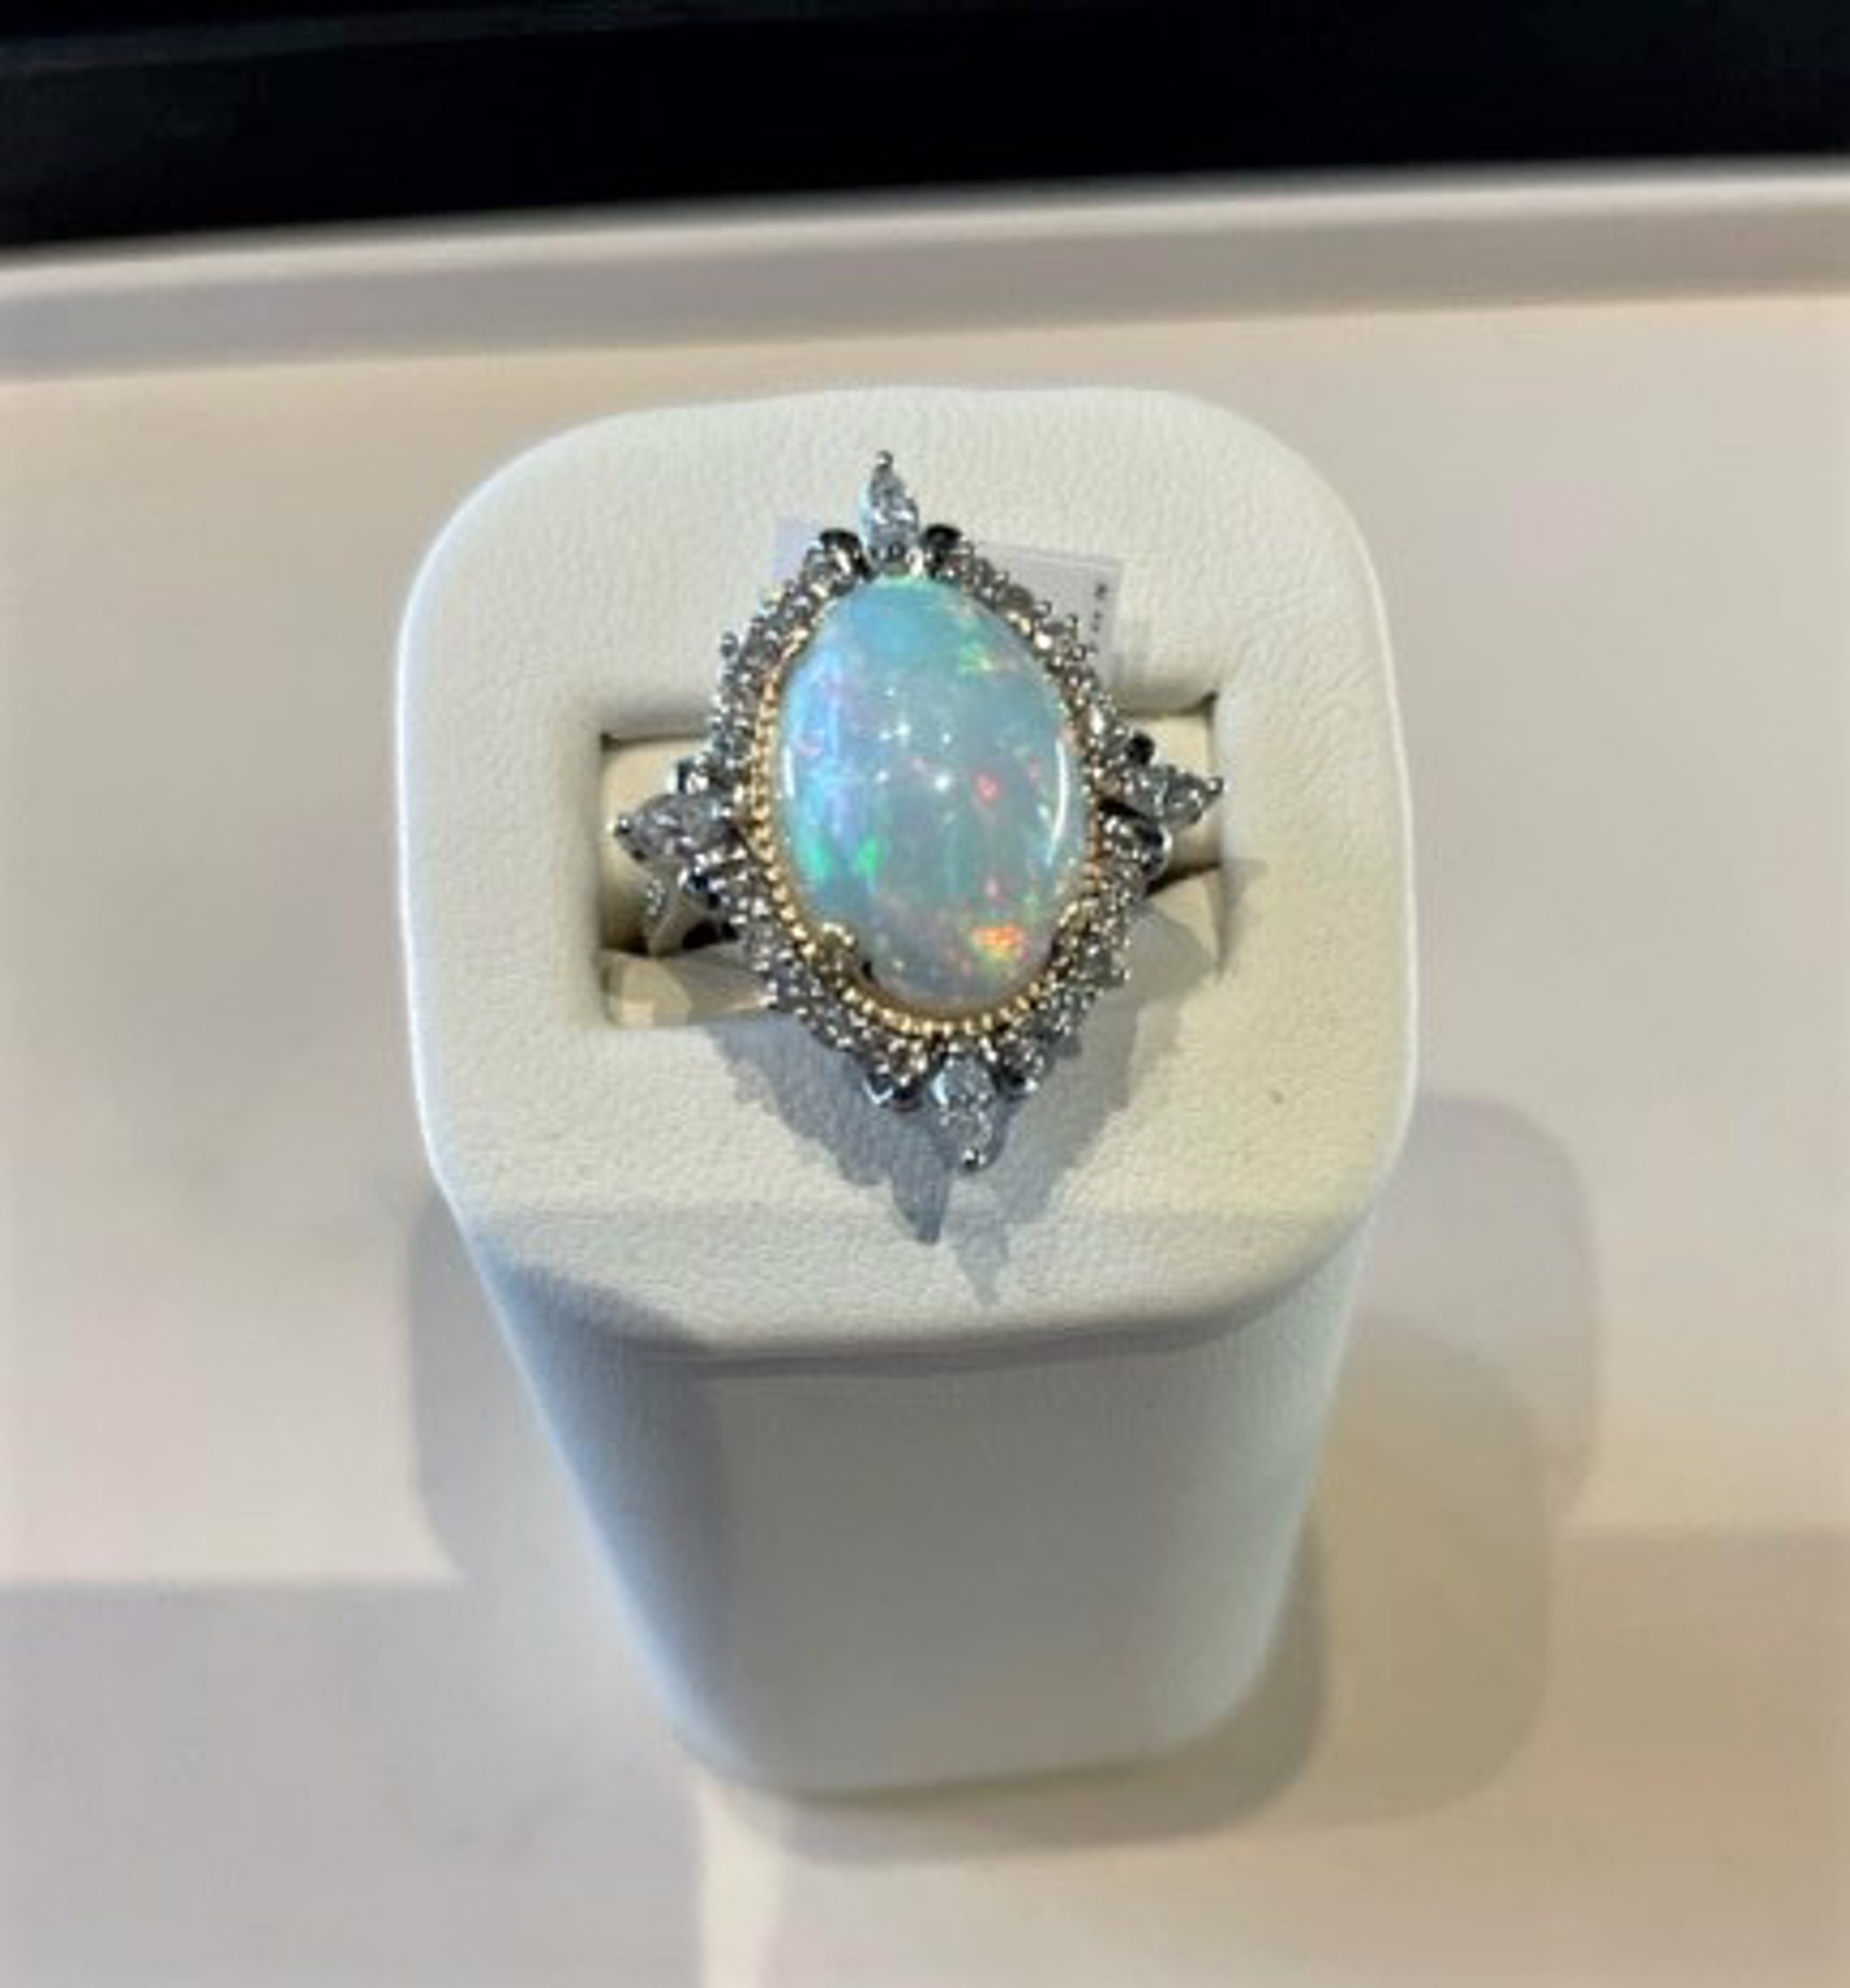 Oval Ethiopian Opal surrounded by diamonds in 14k white gold by Melinda Lawton Jewelry